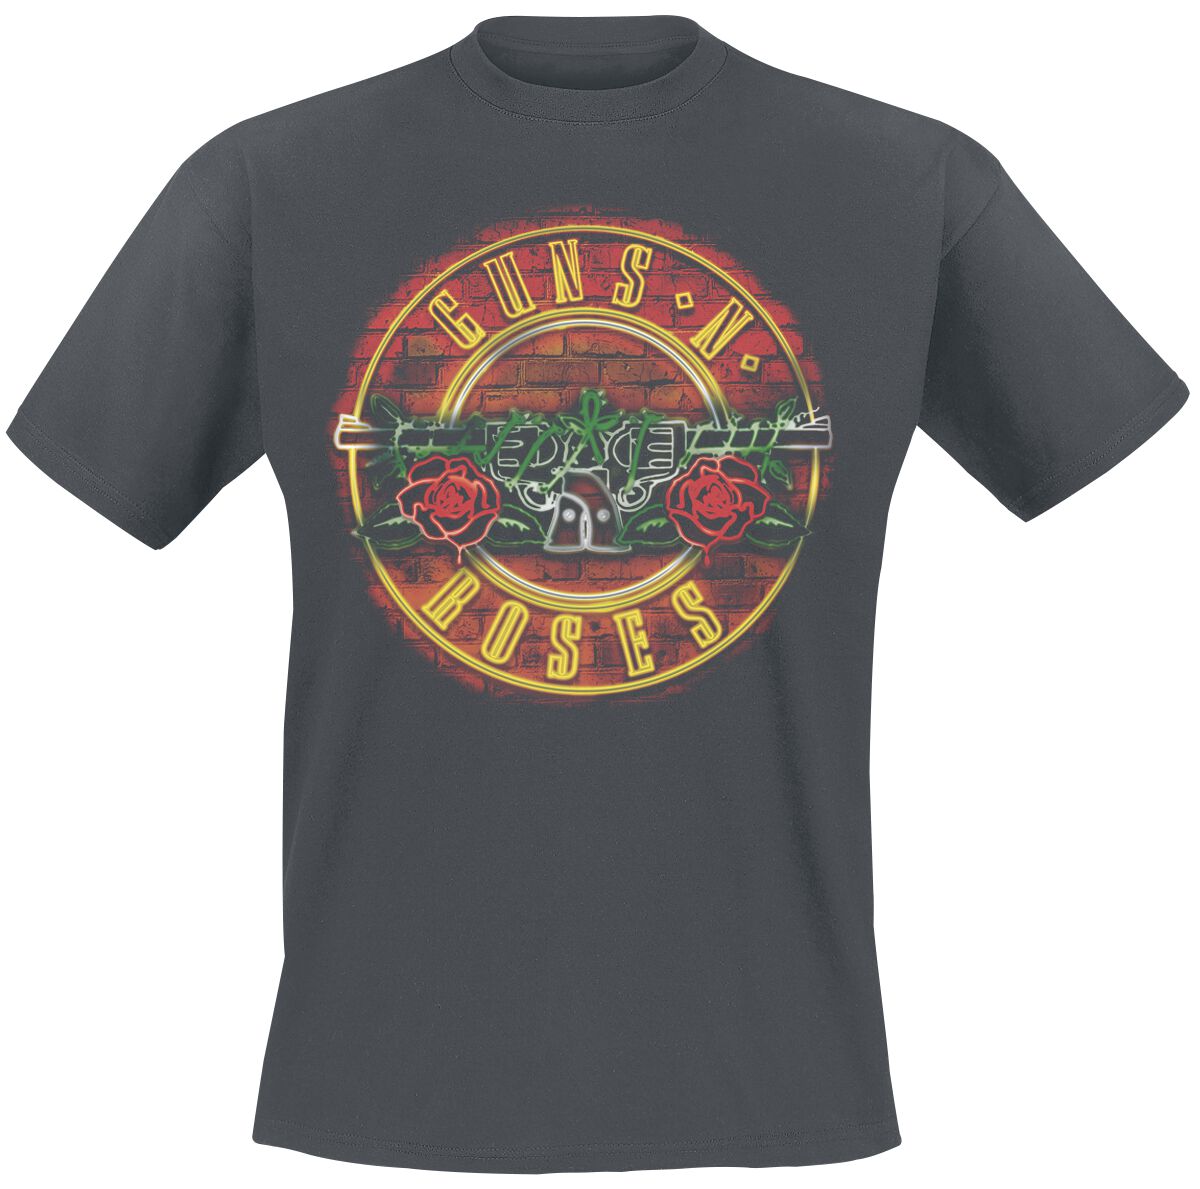 Image of Guns N' Roses Amplified Collection - Neon Sign T-Shirt charcoal